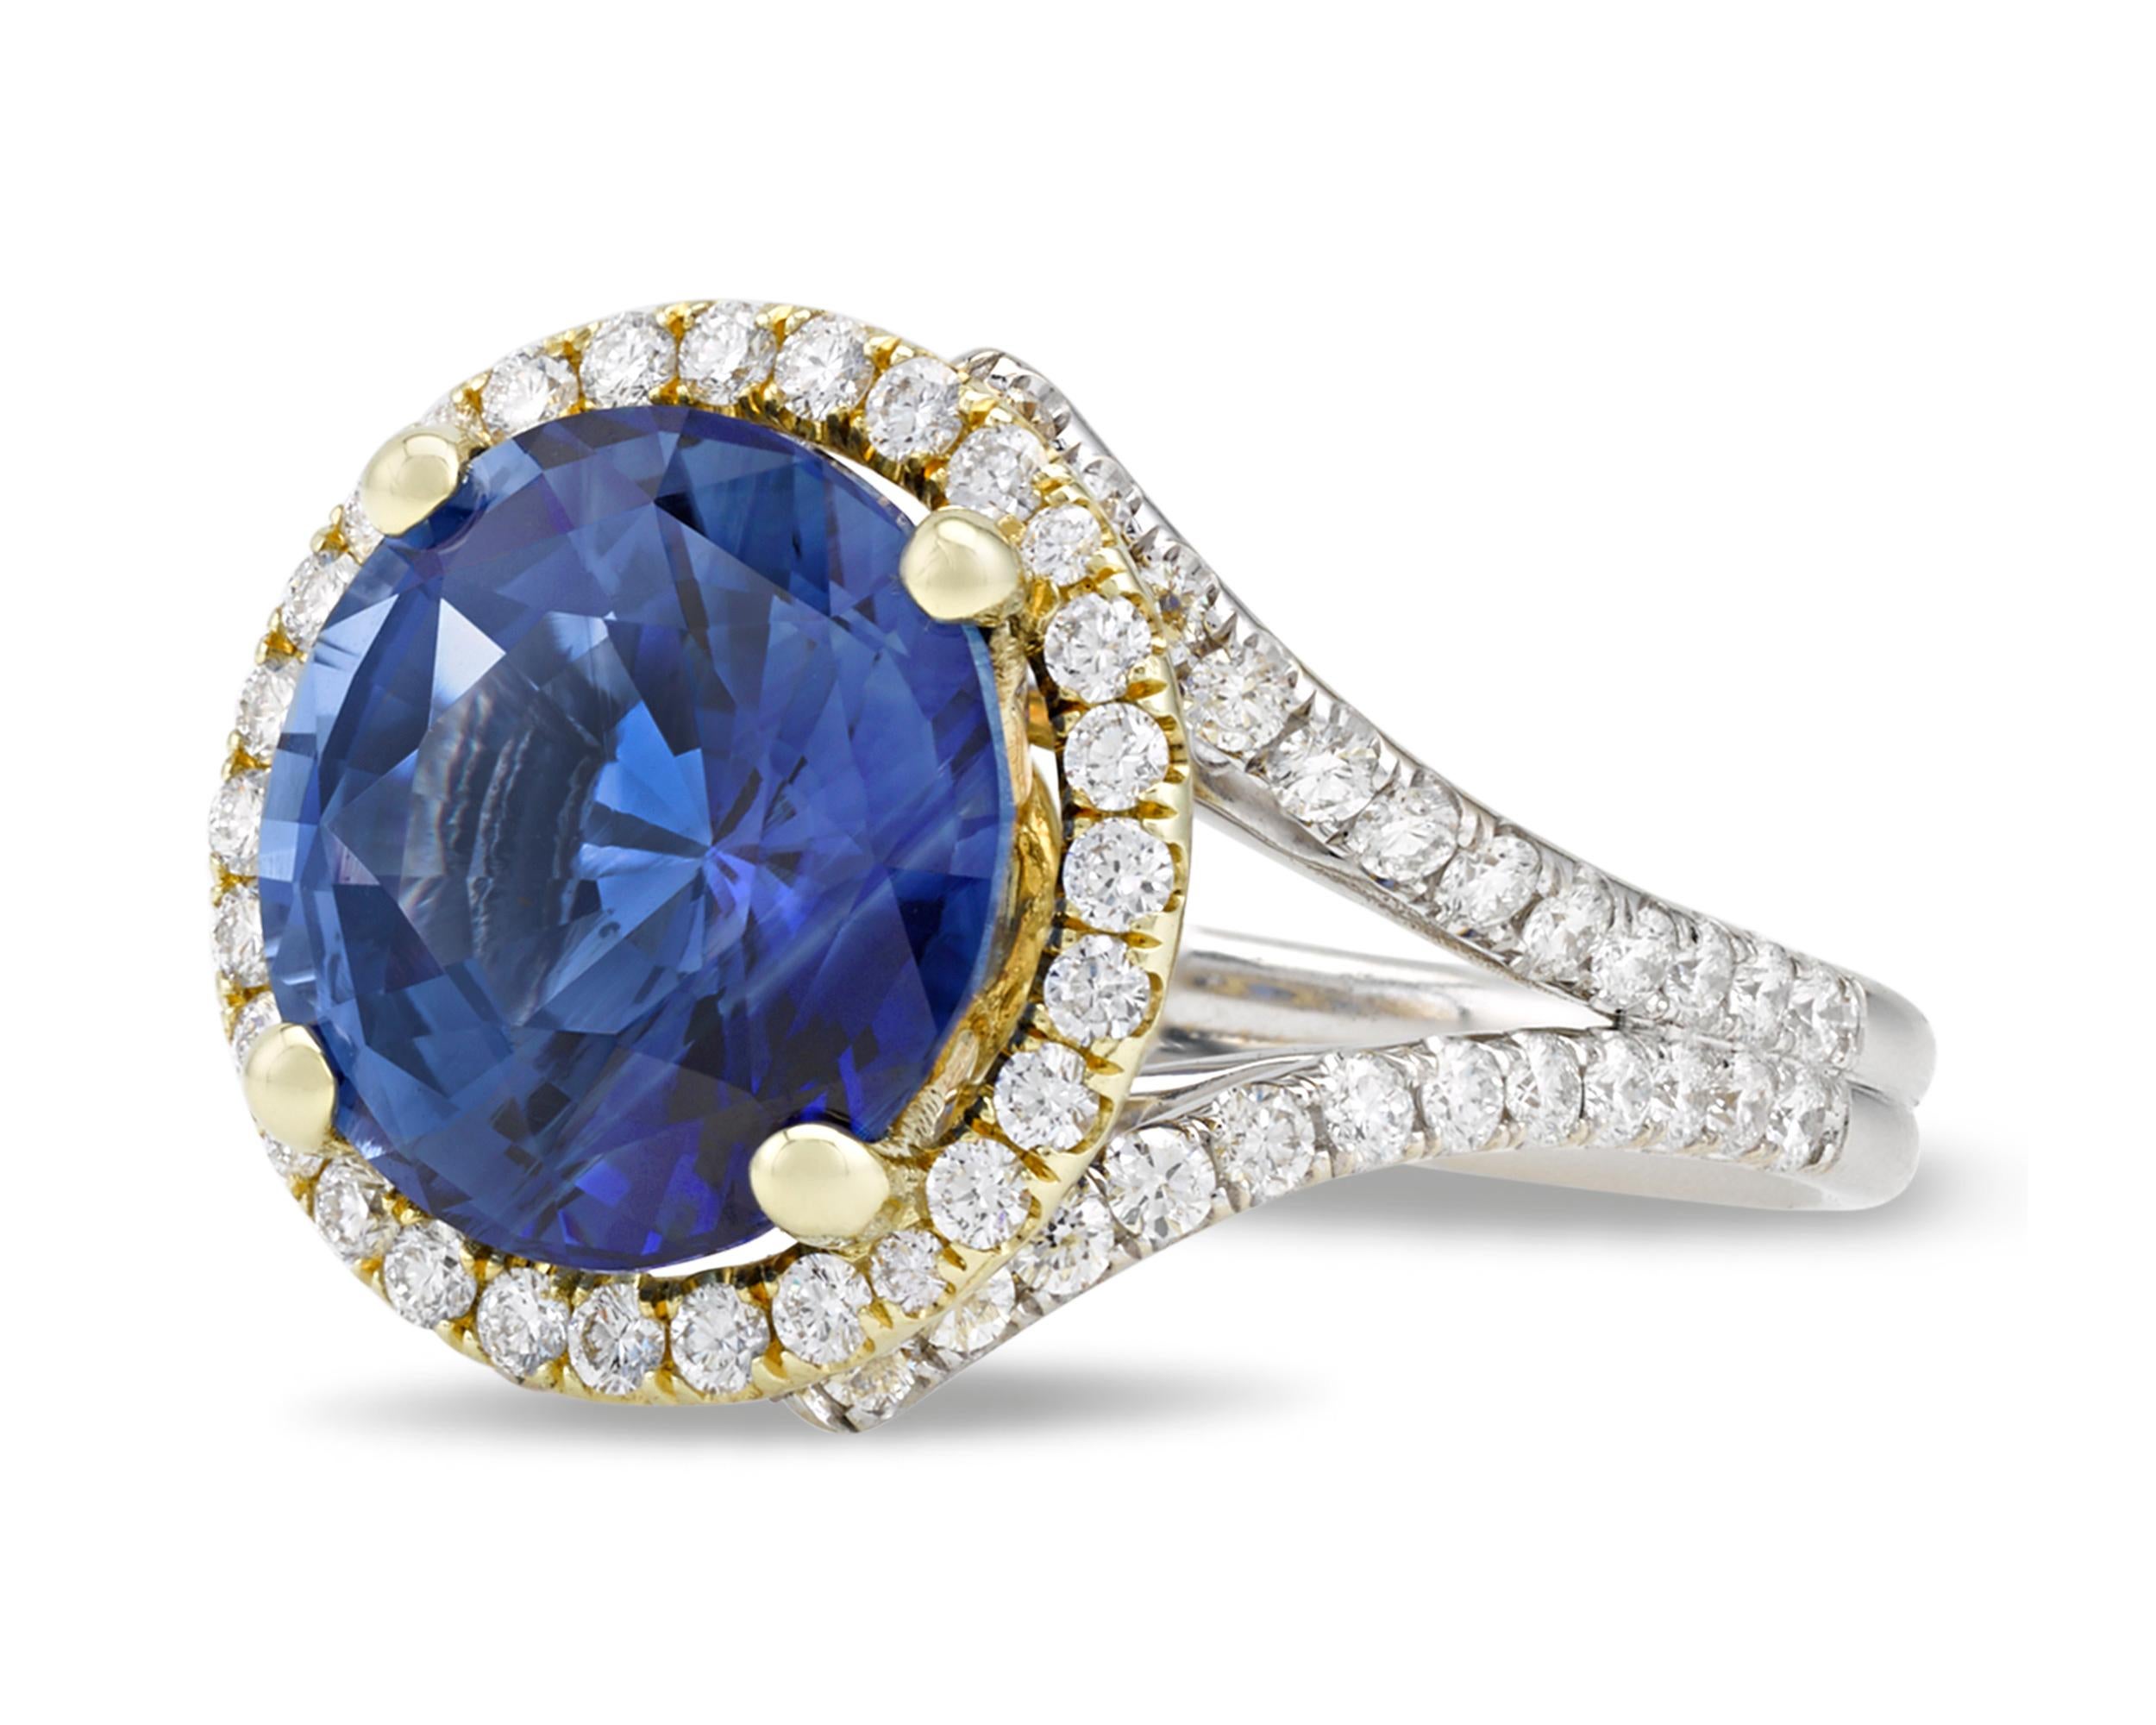 An exceptional Ceylon sapphire exhibiting a stunning cornflower blue hue is at the center of this eye-catching ring. The rare gemstone boasts 5.65 carats, and its round brilliant cut perfectly displays its extraordinary color. A halo of white